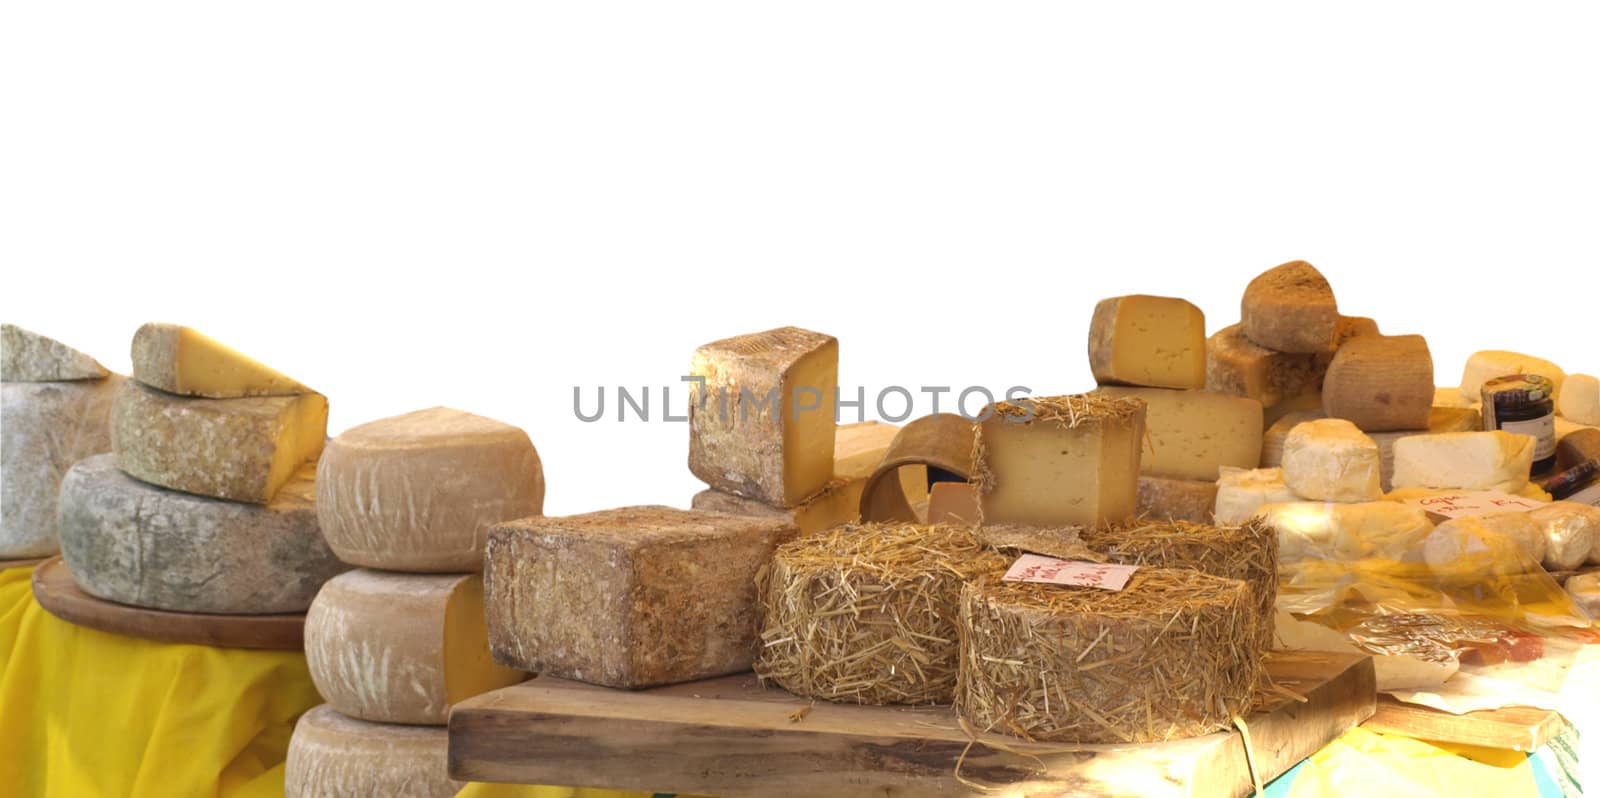 Range of organic agriculture cheese